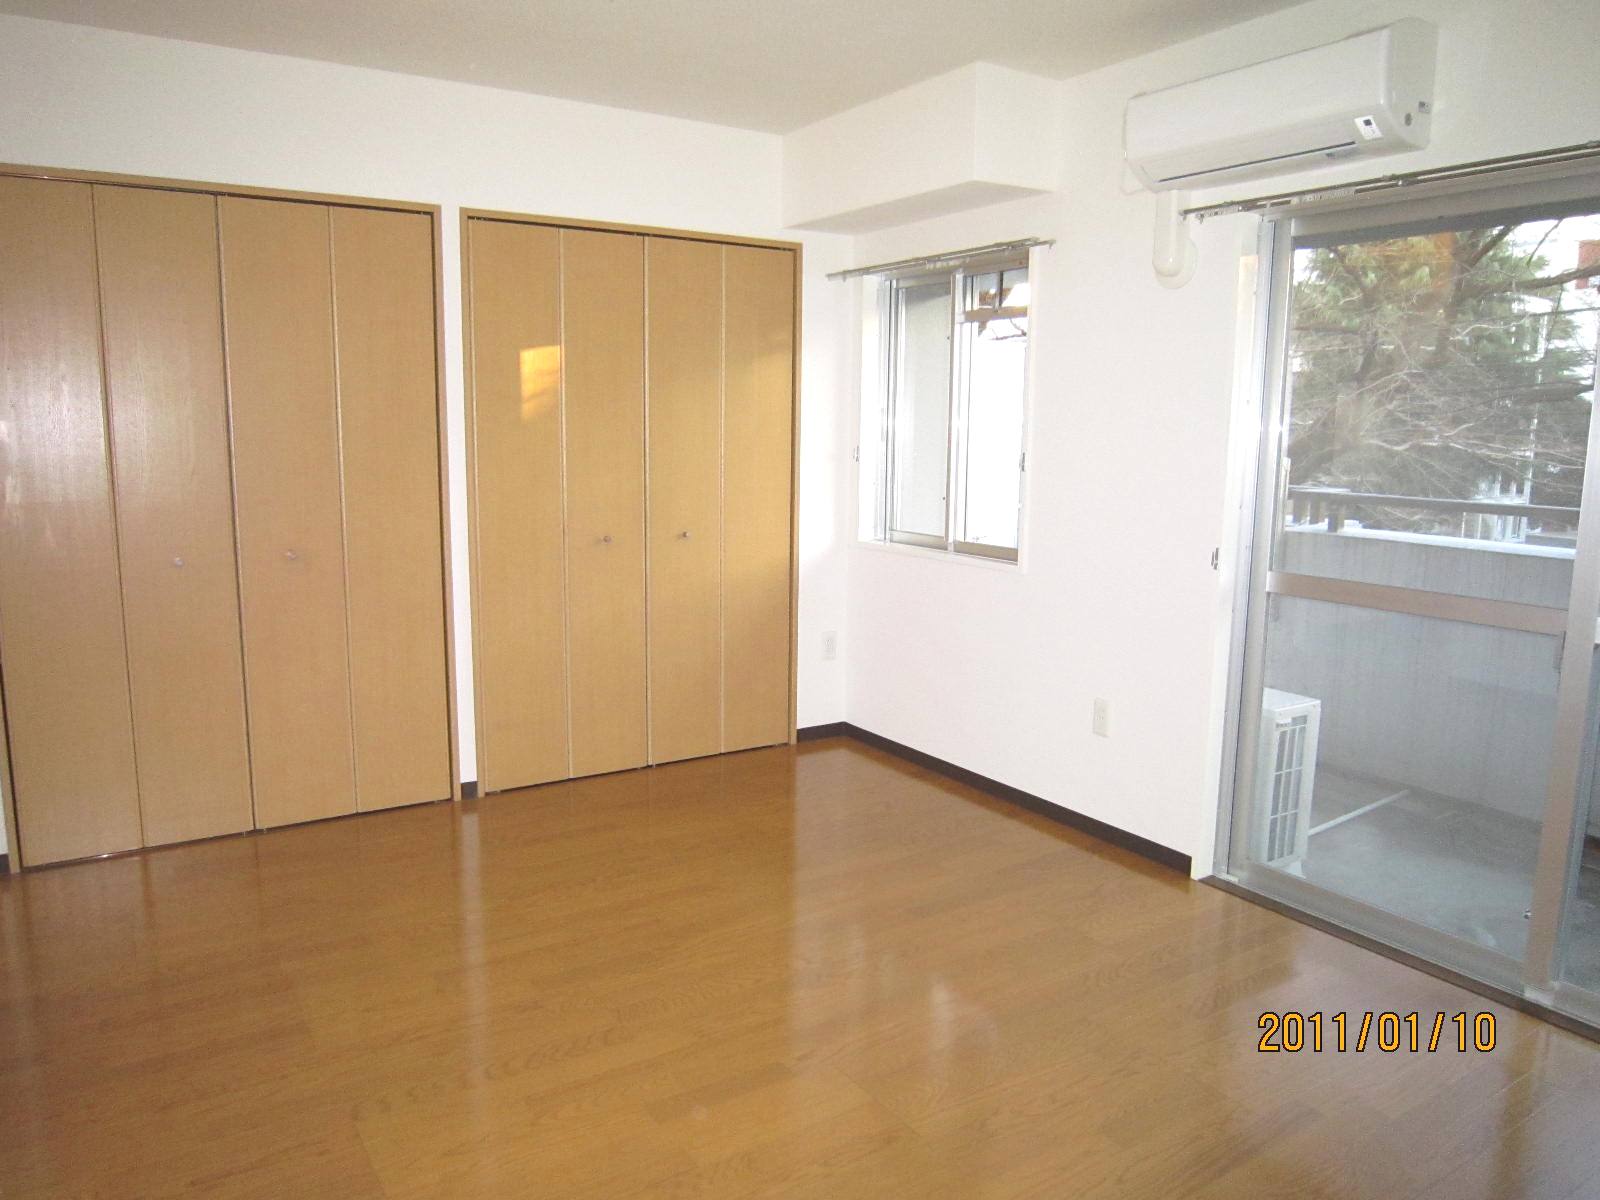 Living and room. Air conditioning in the living room ・ There is floor heating